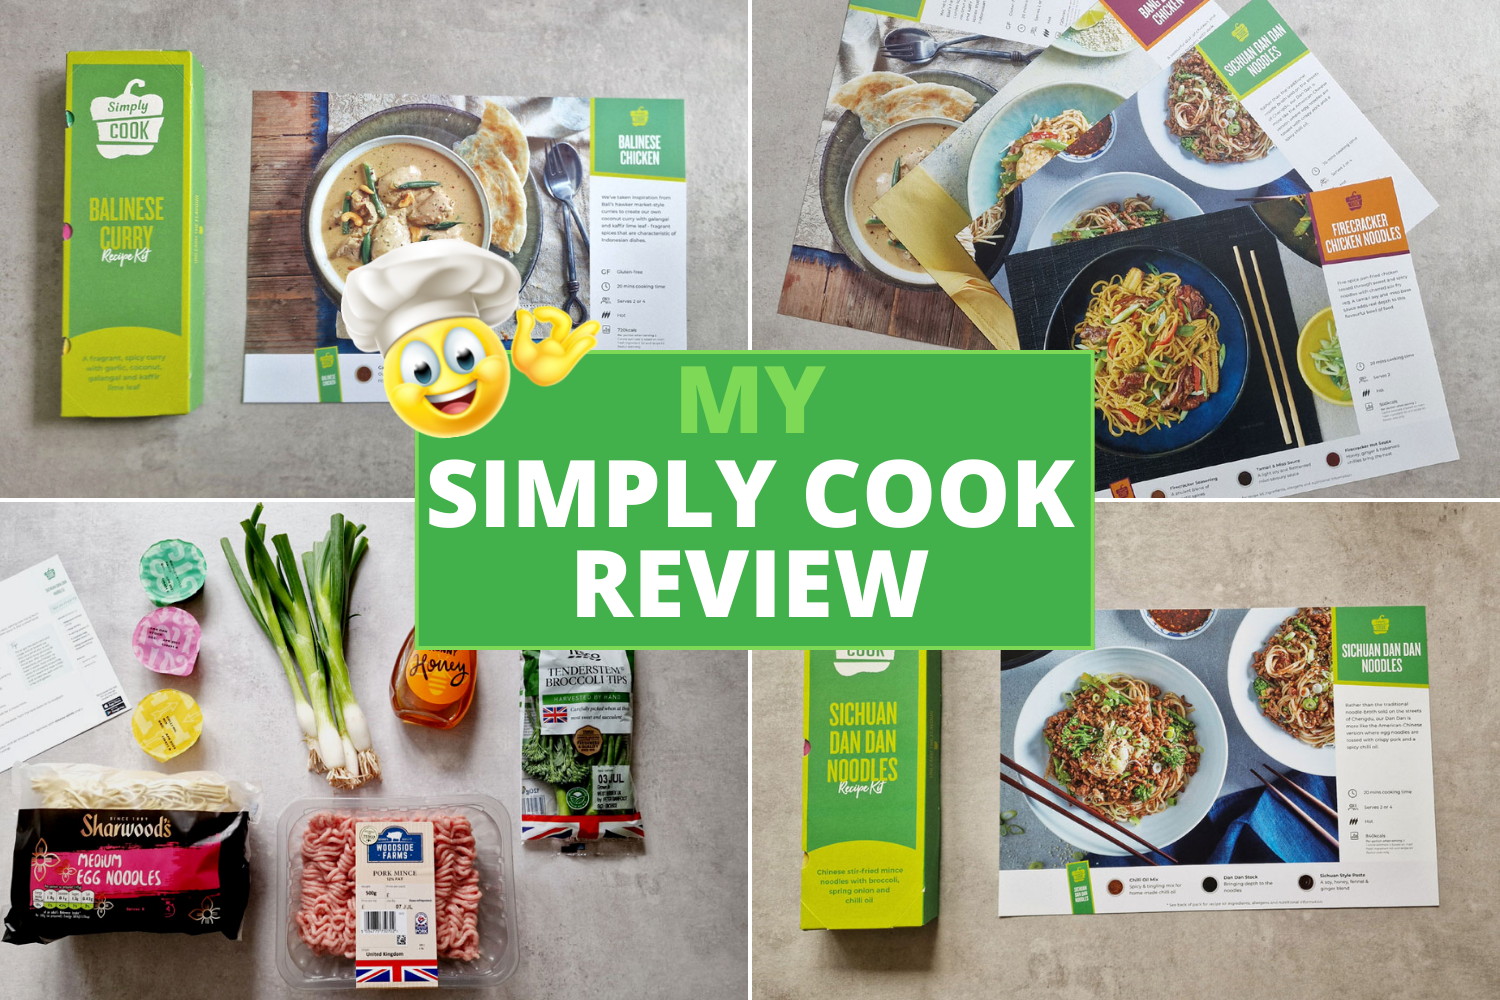 My Simply Cook Review with recipe cards